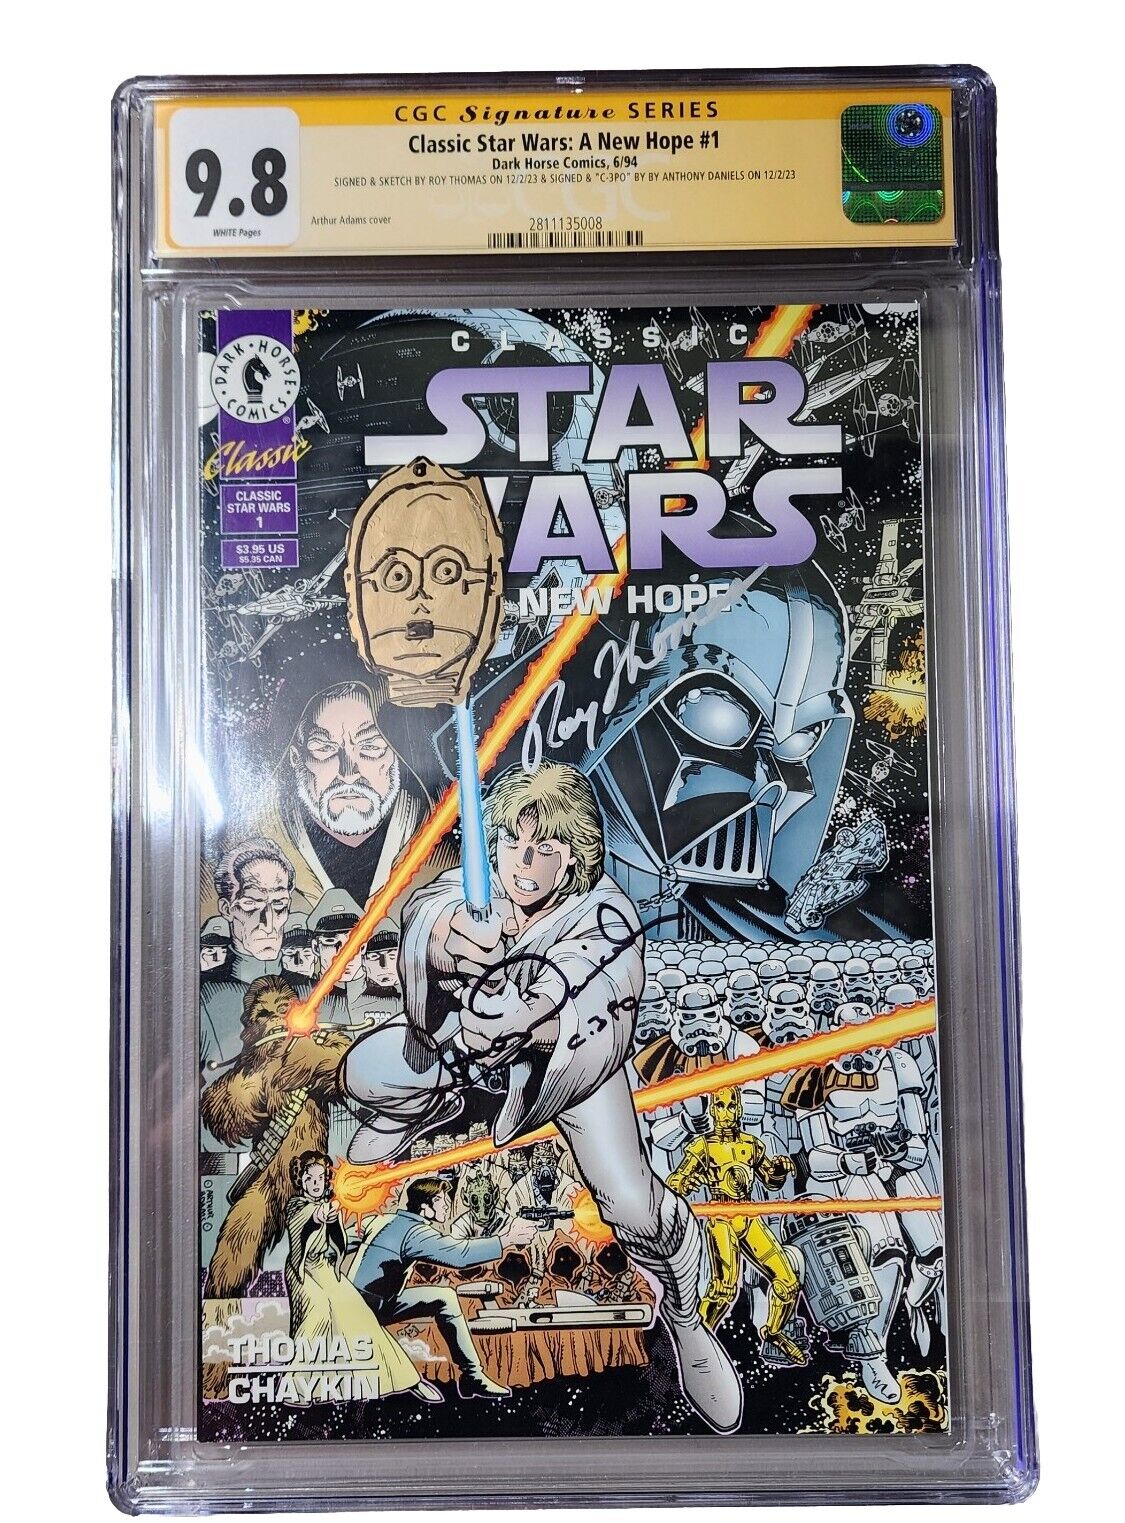 Classic Star Wars A New Hope #1 CGC 9.8 Signed Sketch Roy Thomas ANTHONY DANIELS